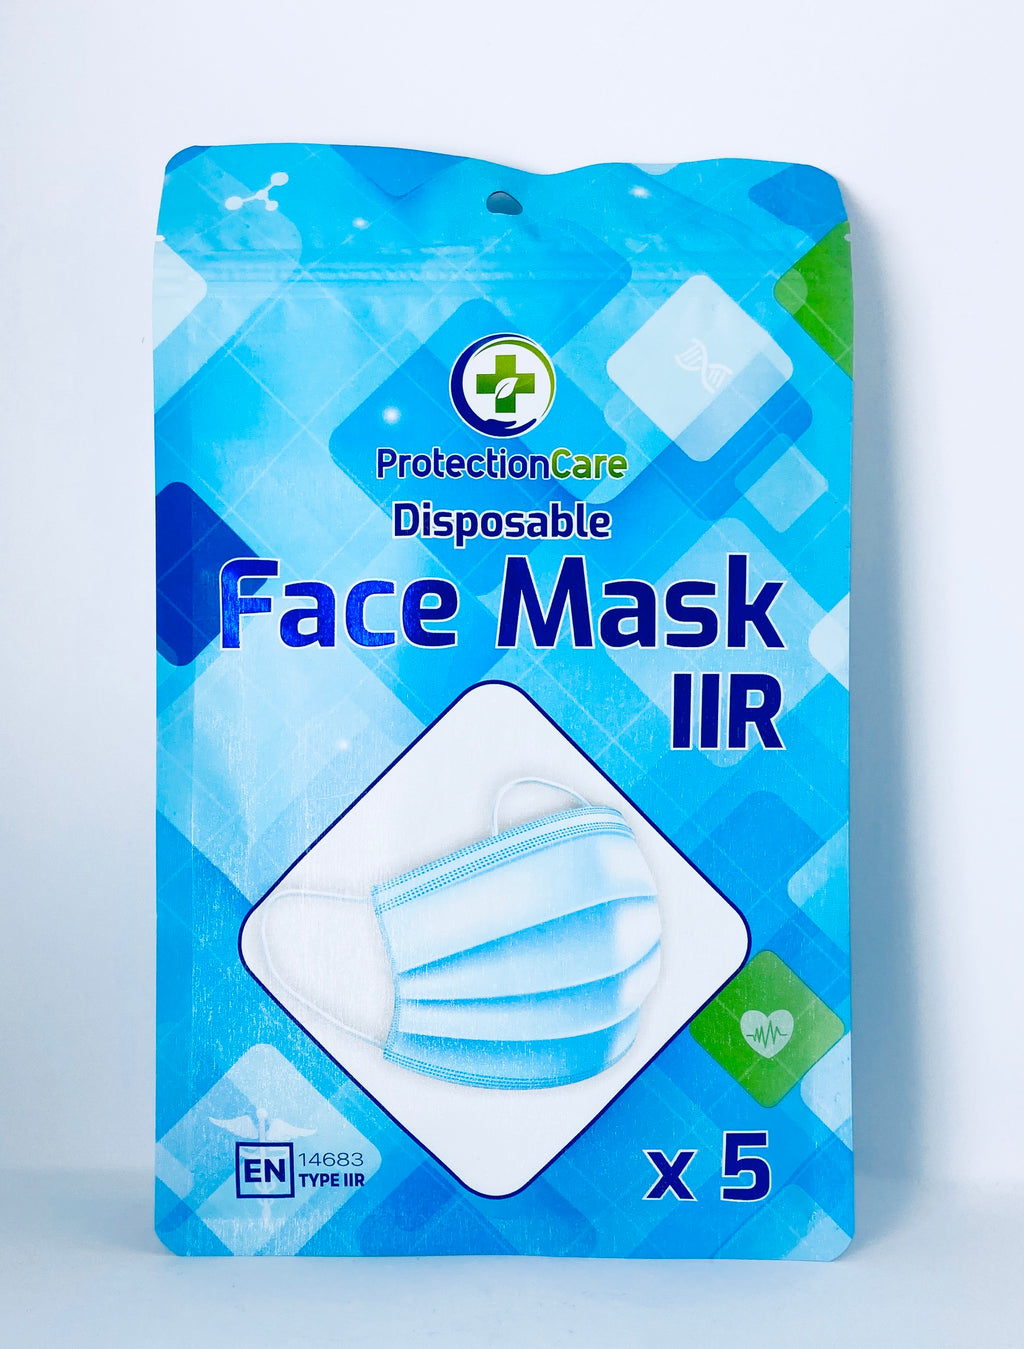 Face Mask IIR 5 stk. - ProtectionCare